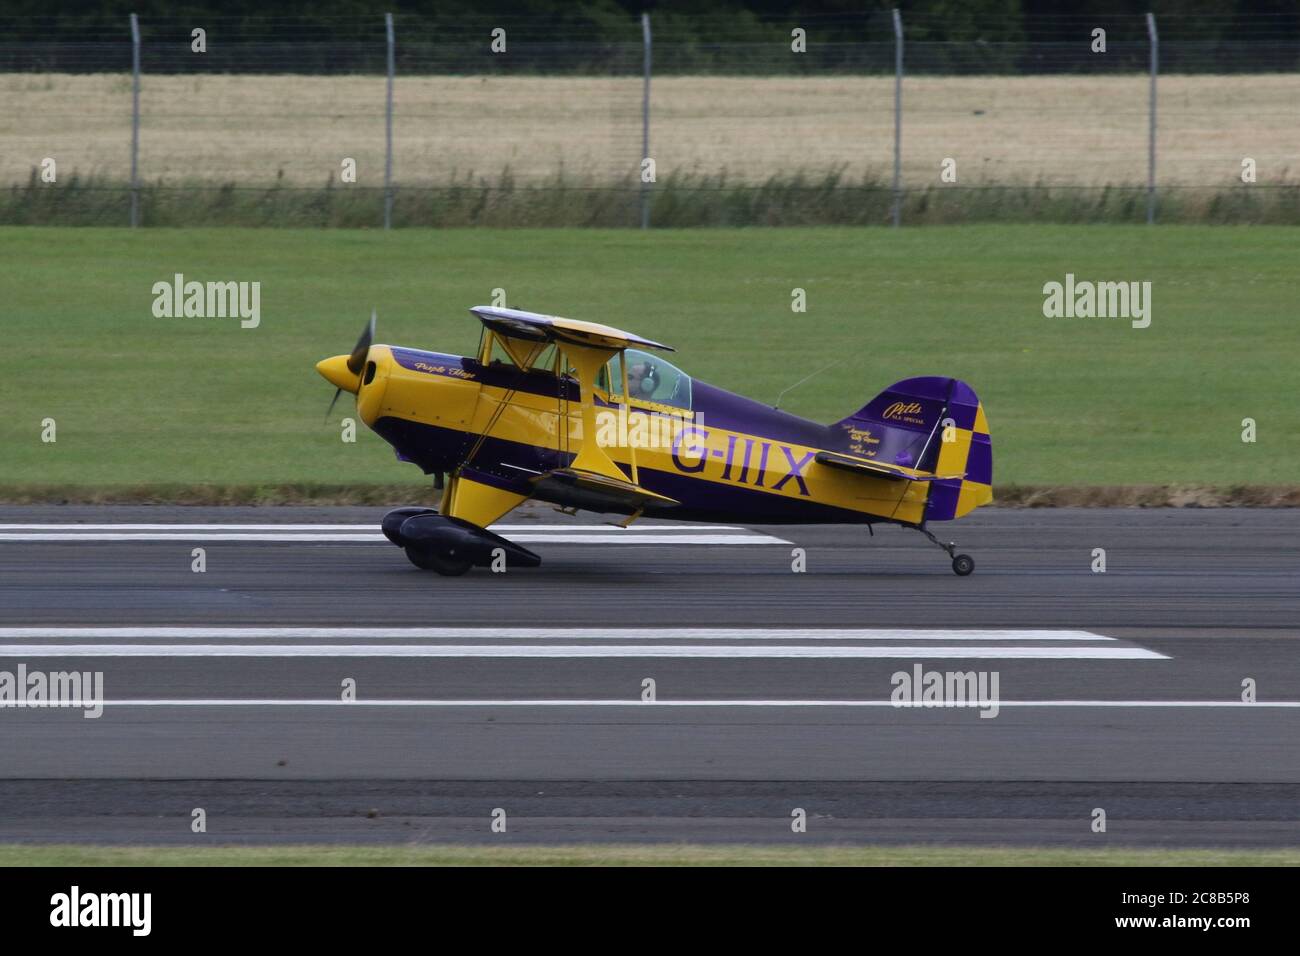 G-IIIX 'Purple Haze', a Pitts S1.S Special light aerobatic biplane, at Prestwick Airport in Ayrshire. Stock Photo